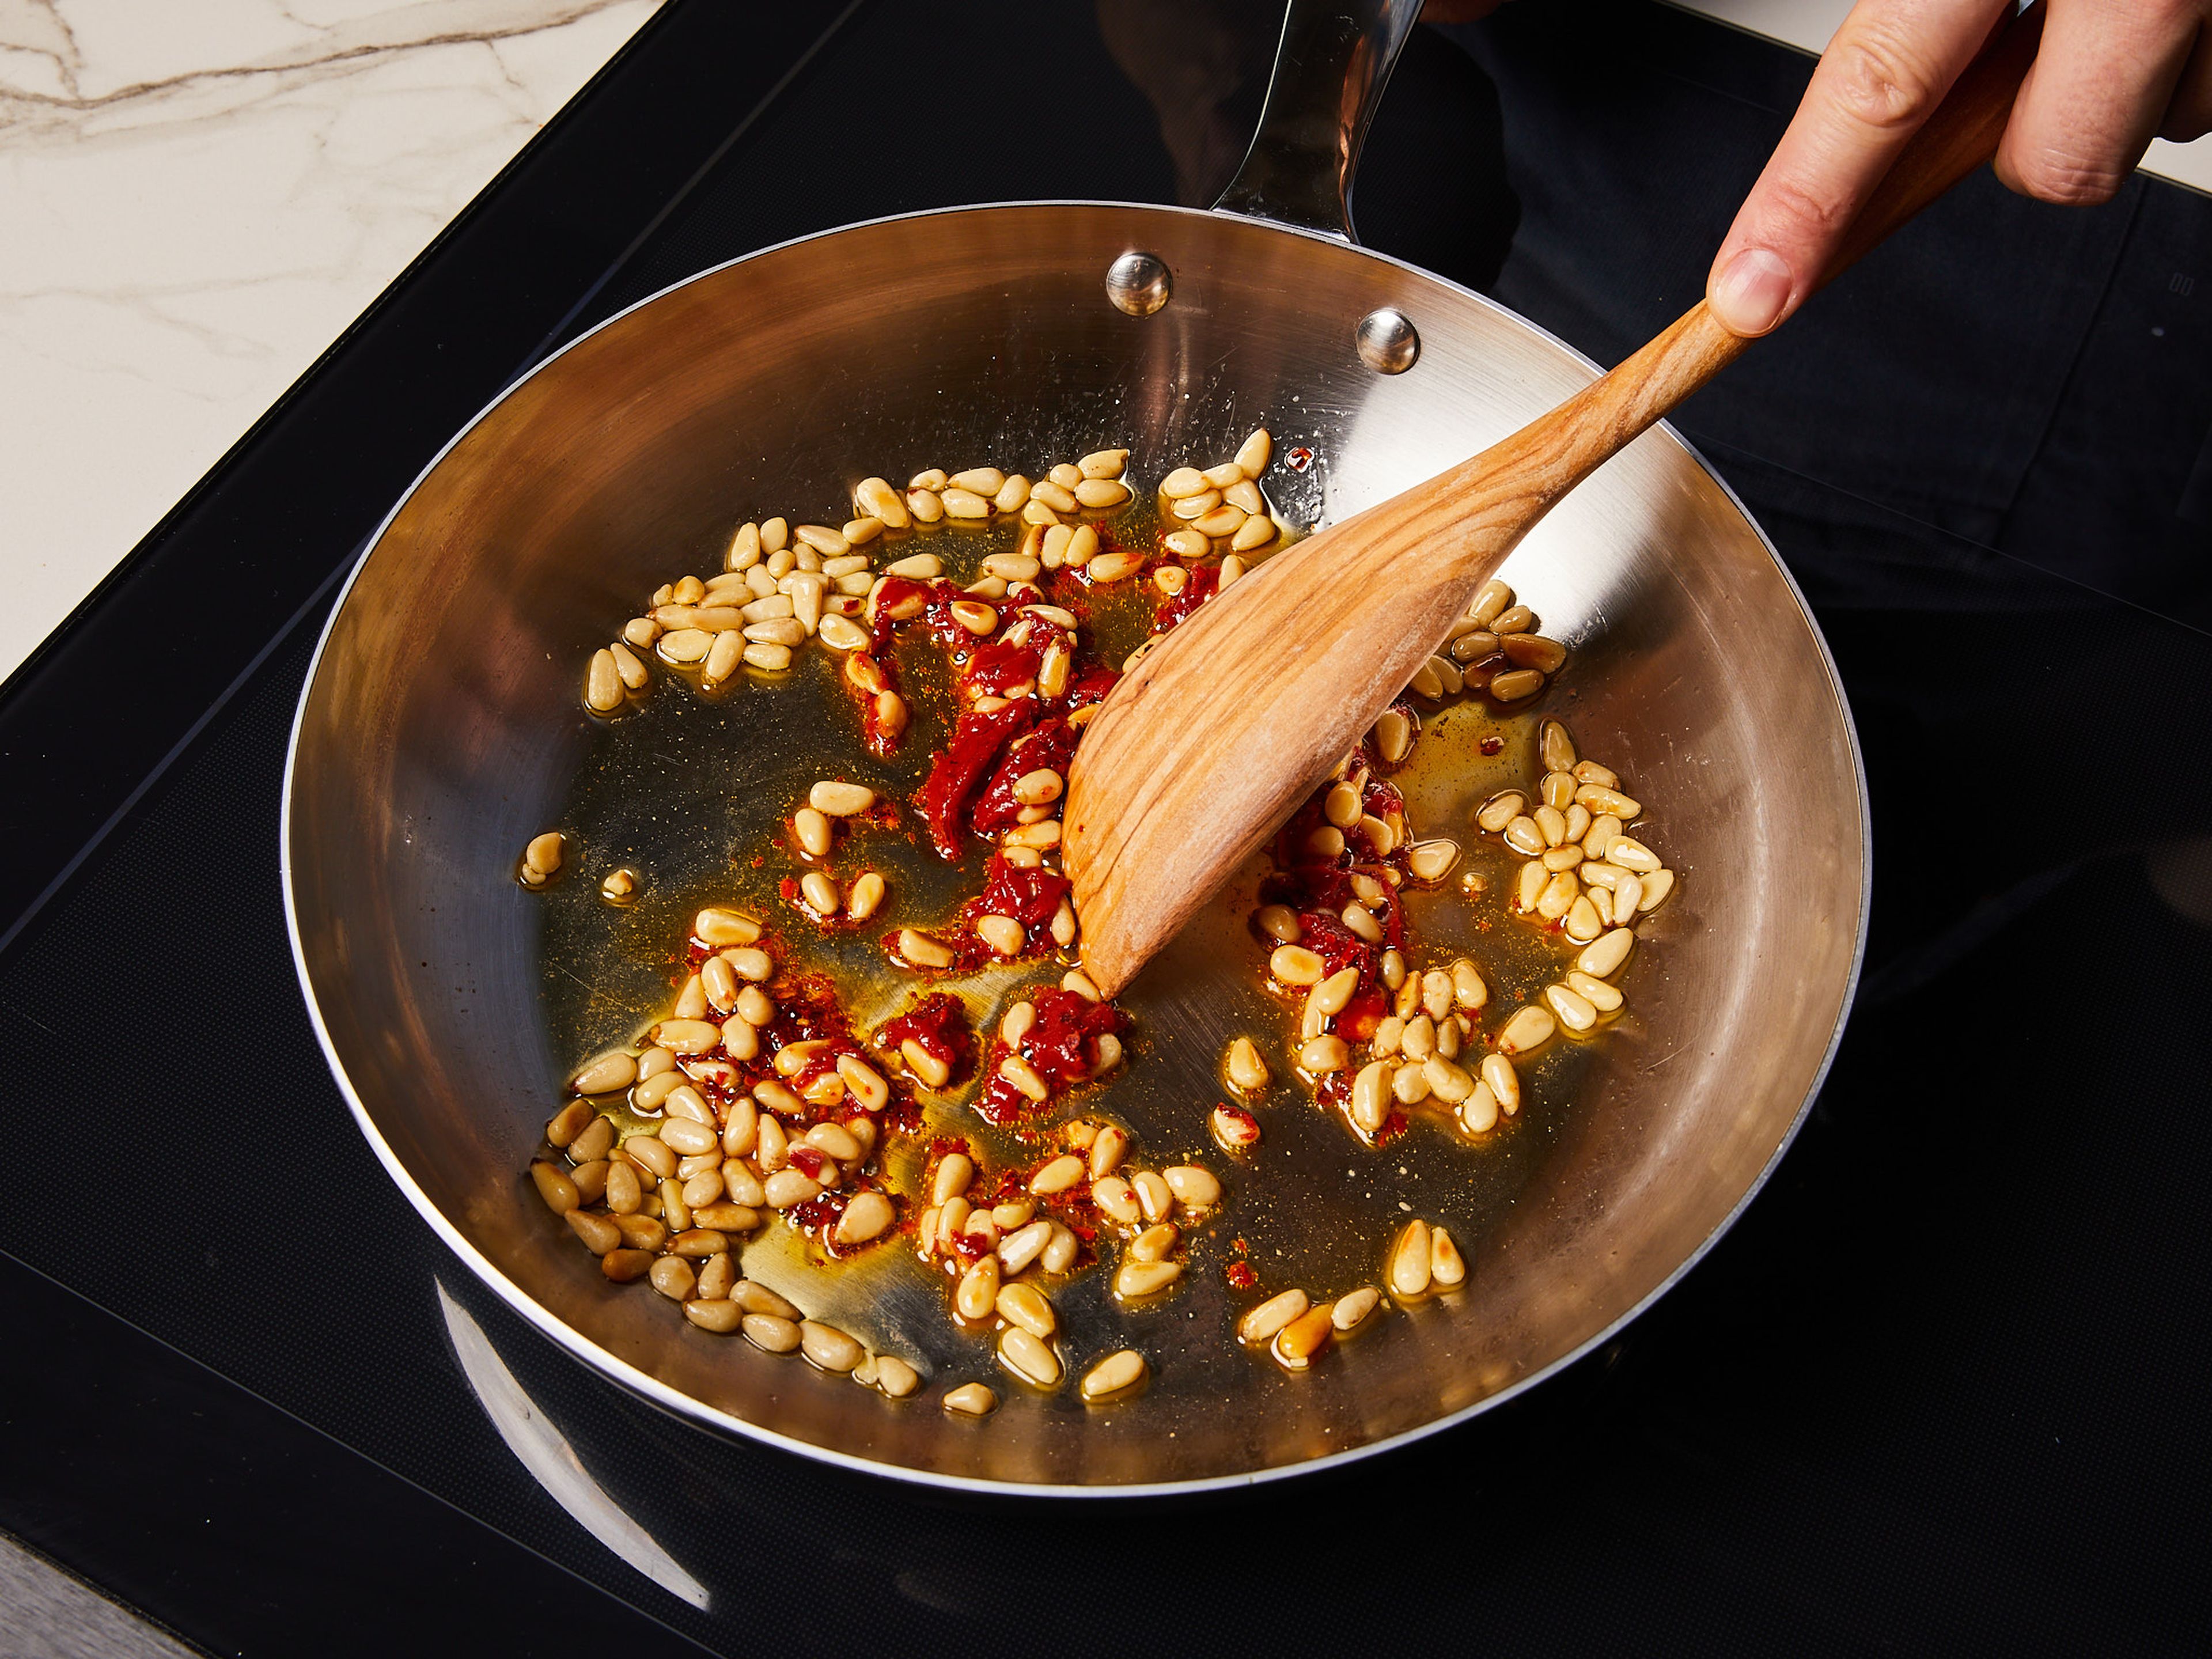 In a frying pan, heat some olive oil over medium heat. Add pine nuts, fry for approx. 2 min. until the nuts take on some color. Reduce heat to medium low, add tomato paste and chili flakes. Fry until the tomato paste is darkened, set aside to cool. In the meantime, grate Parmesan cheese. Set a large pot of water to boil.